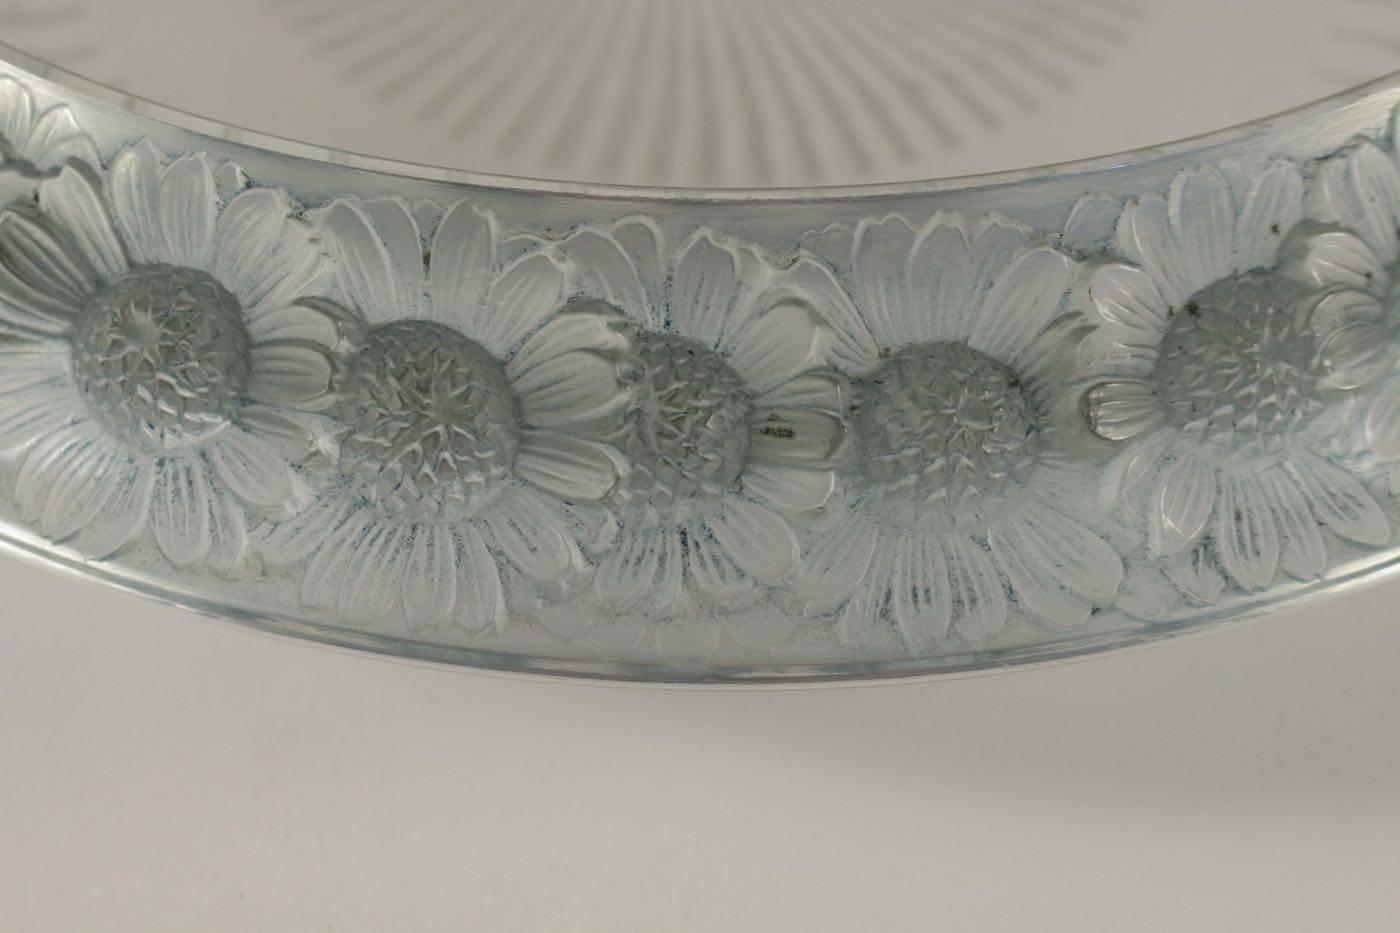 Clear glass with a frosted and blue patinated daisy flower decorated wide rim surrounding the stem decorated
Signed R Lalique, France
Bibliography: Marcilhac model: 10-404 design 1941.